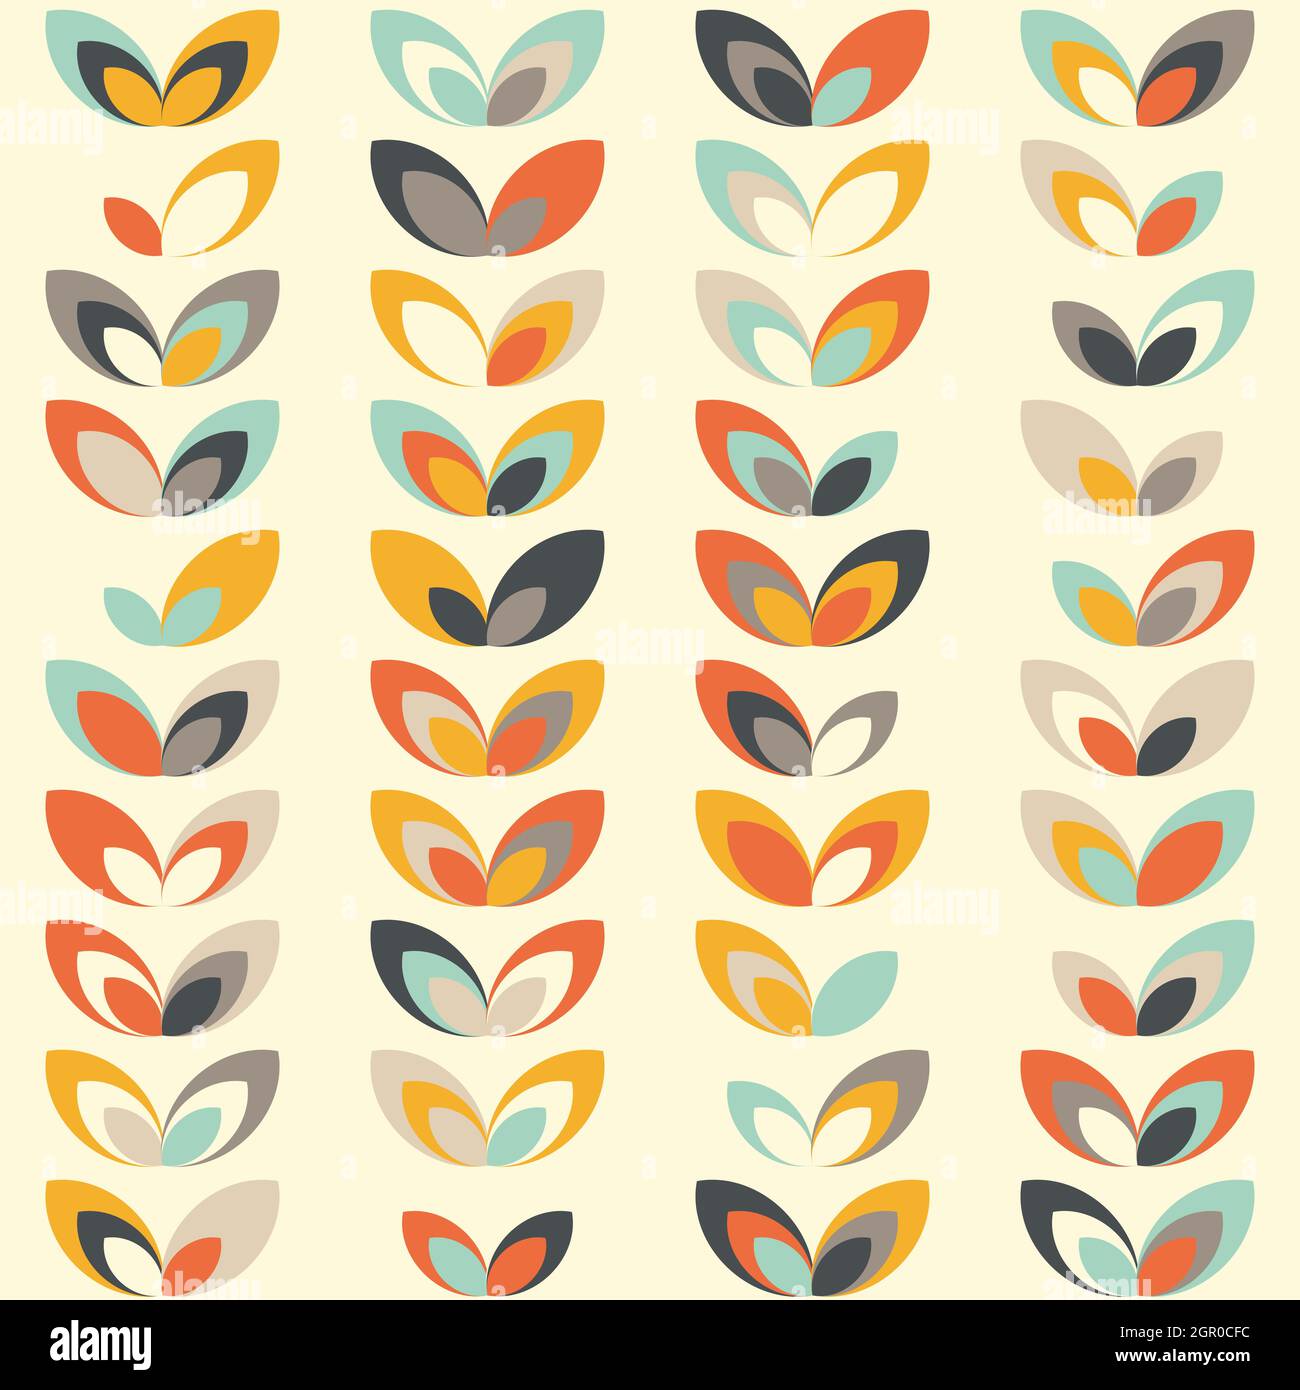 Midcentury geometric retro background. Vintage brown, orange and teal colors. Seamless floral mod pattern, vector illustration. Abstract retro geometr Stock Vector